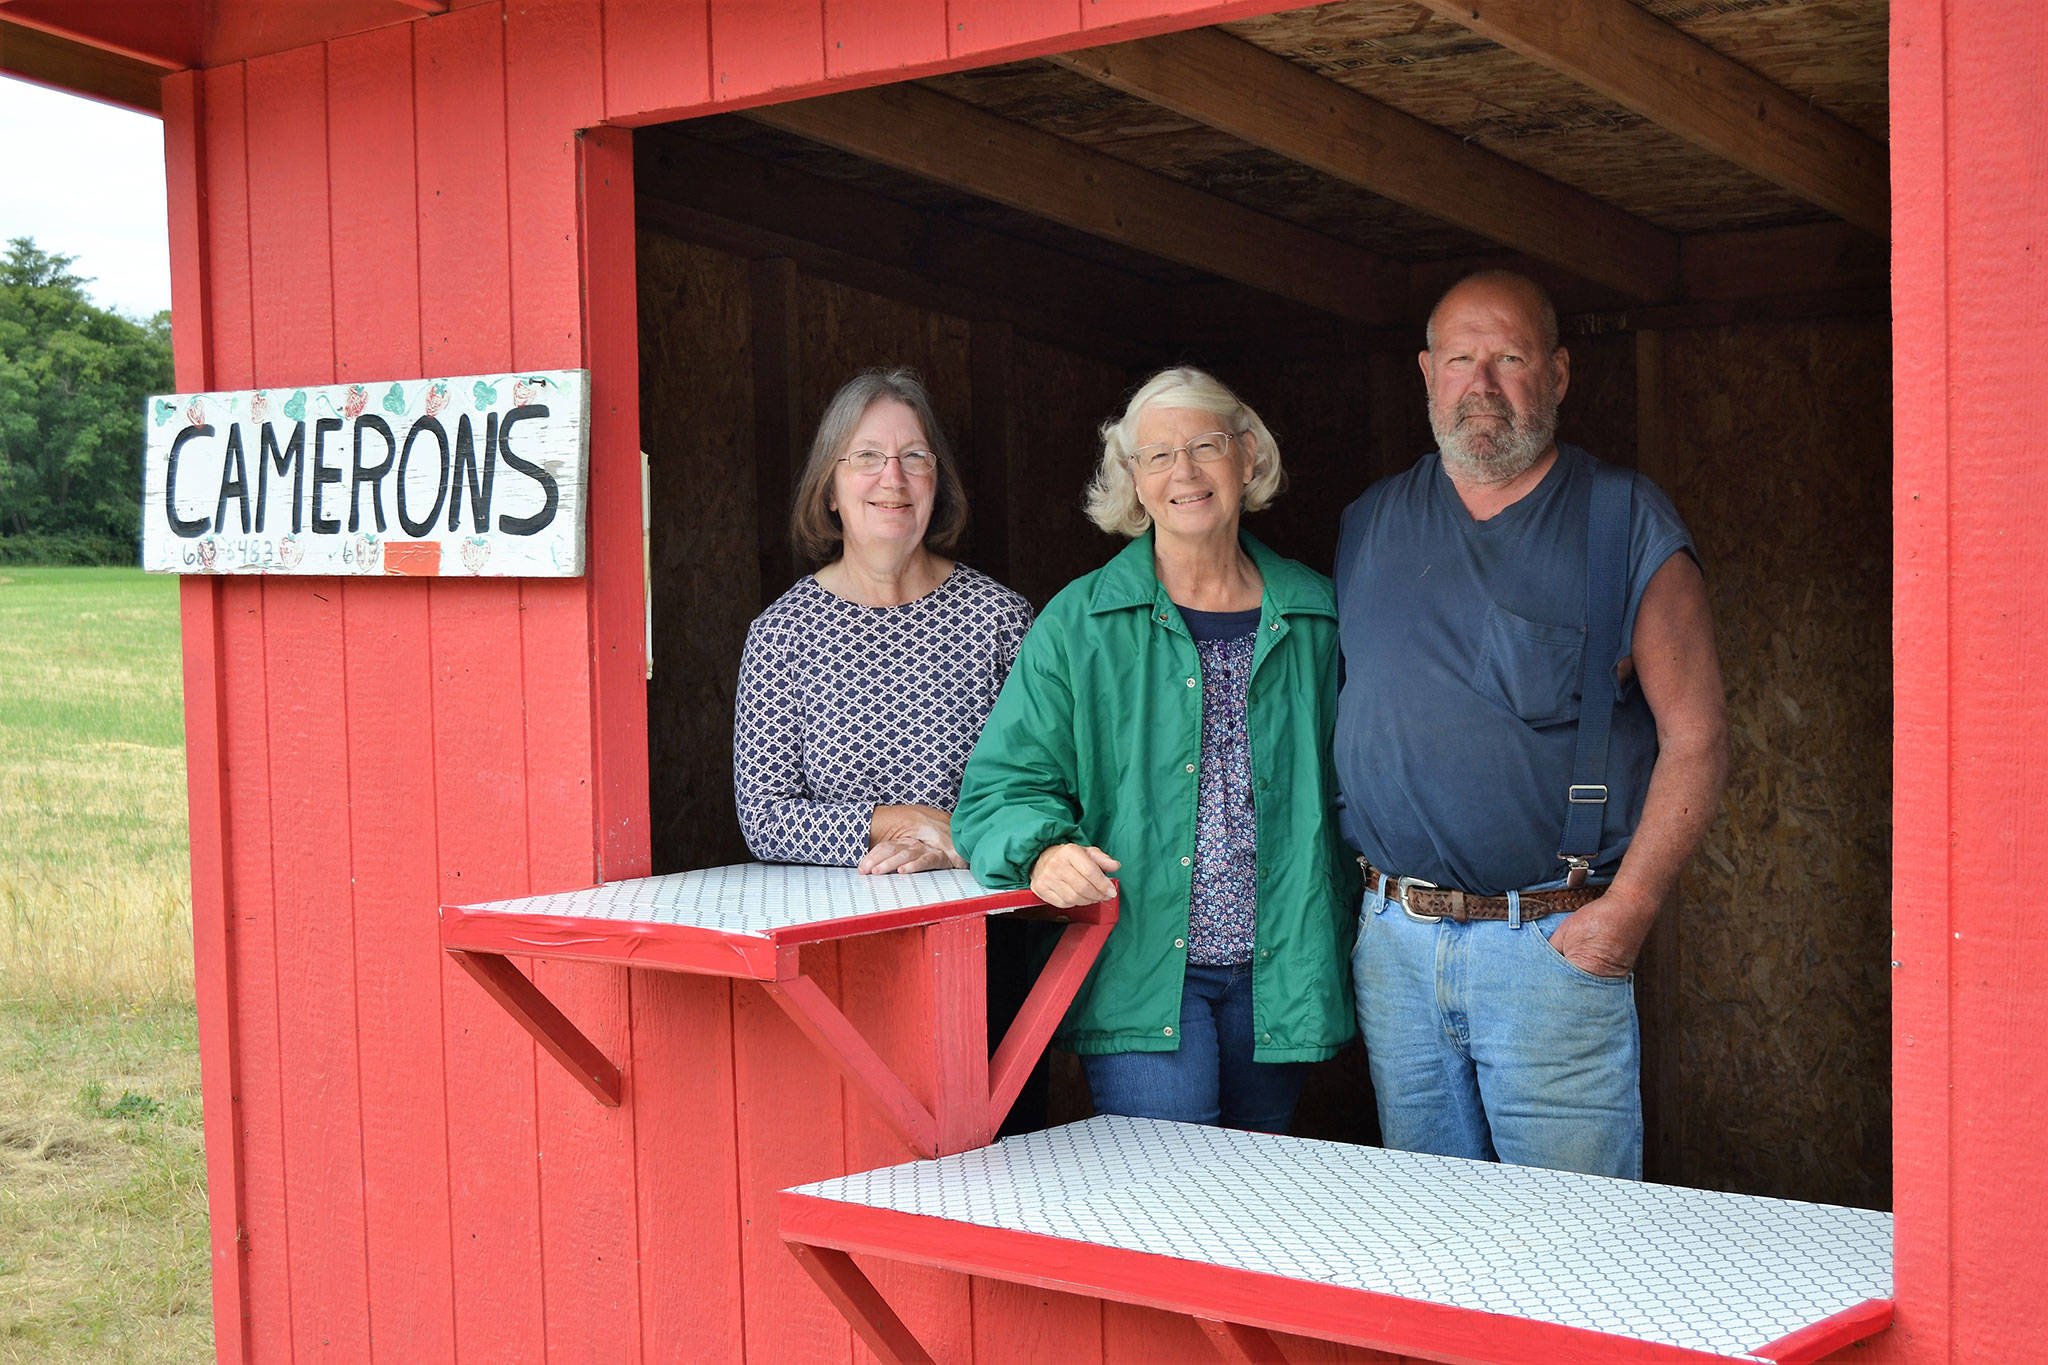 Peggy Adams, on left, and her cousins Sidne and Dave Cameron decided to close down Cameron’s Berry Farm off Woodcock Road this year after more than 40 years in operation. (Matthew Nash/Olympic Peninsula News Group)